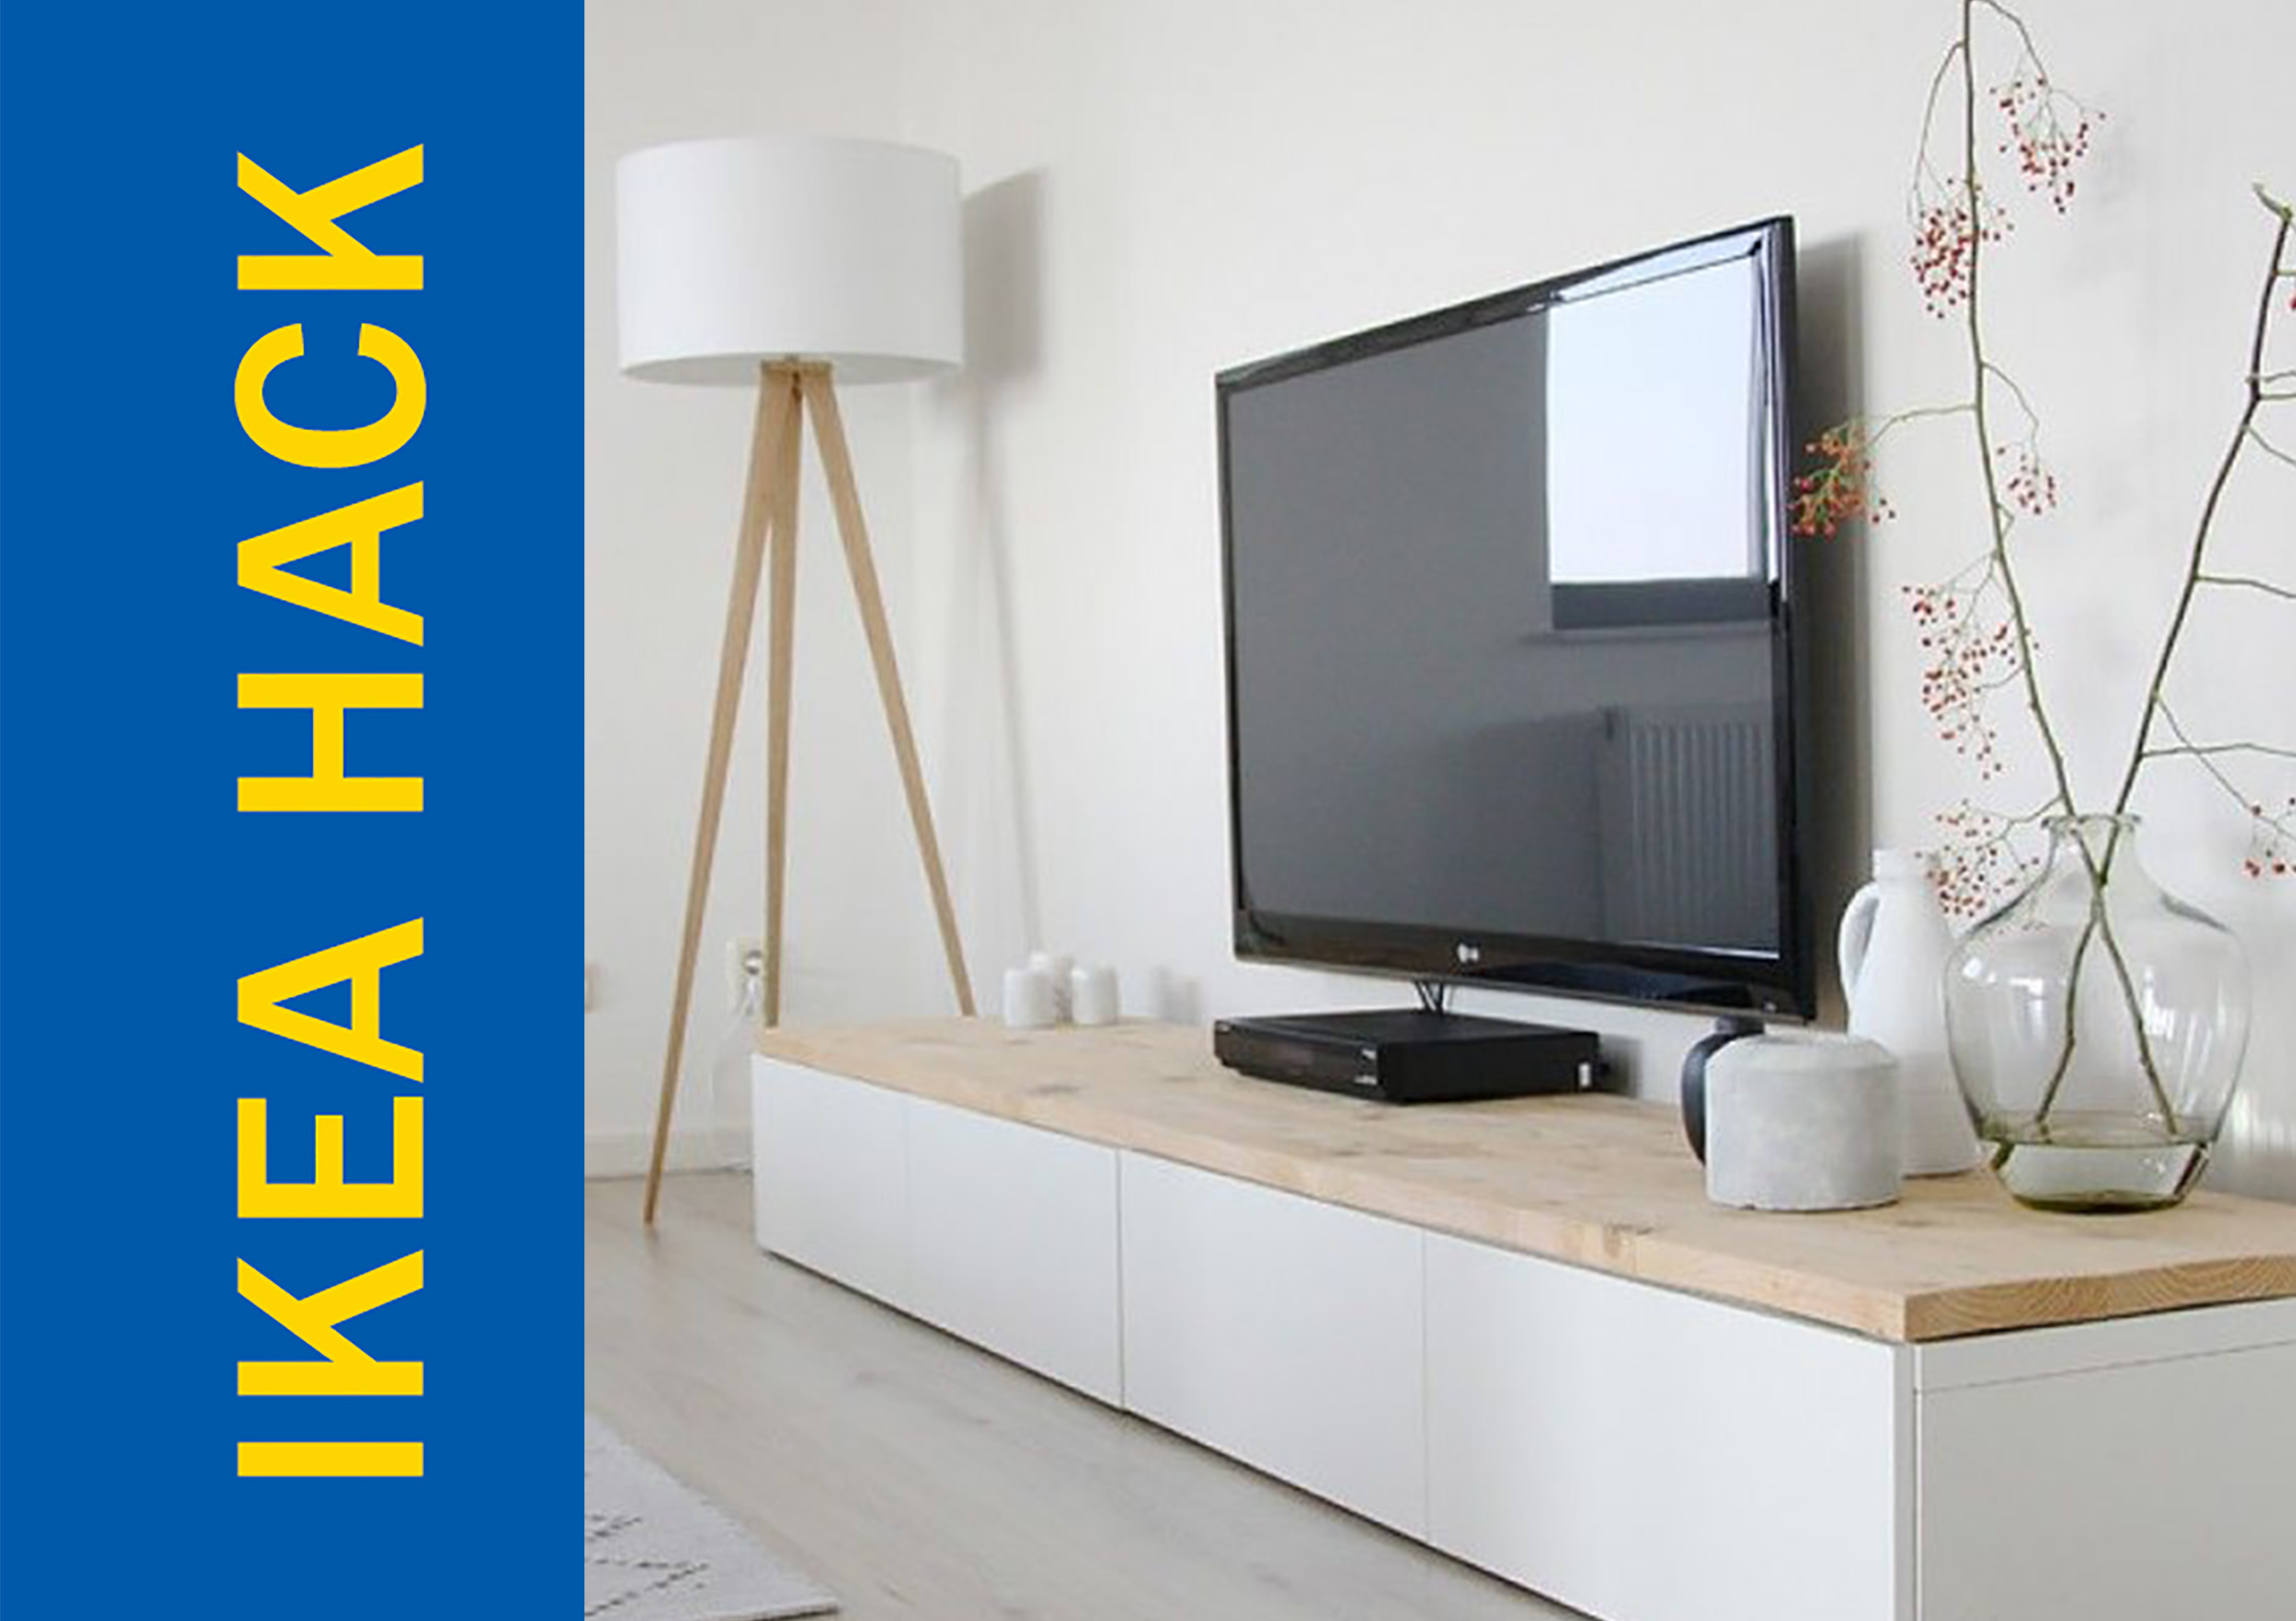 Awesome Ikea Hack of the Week A TV stand that’s modern